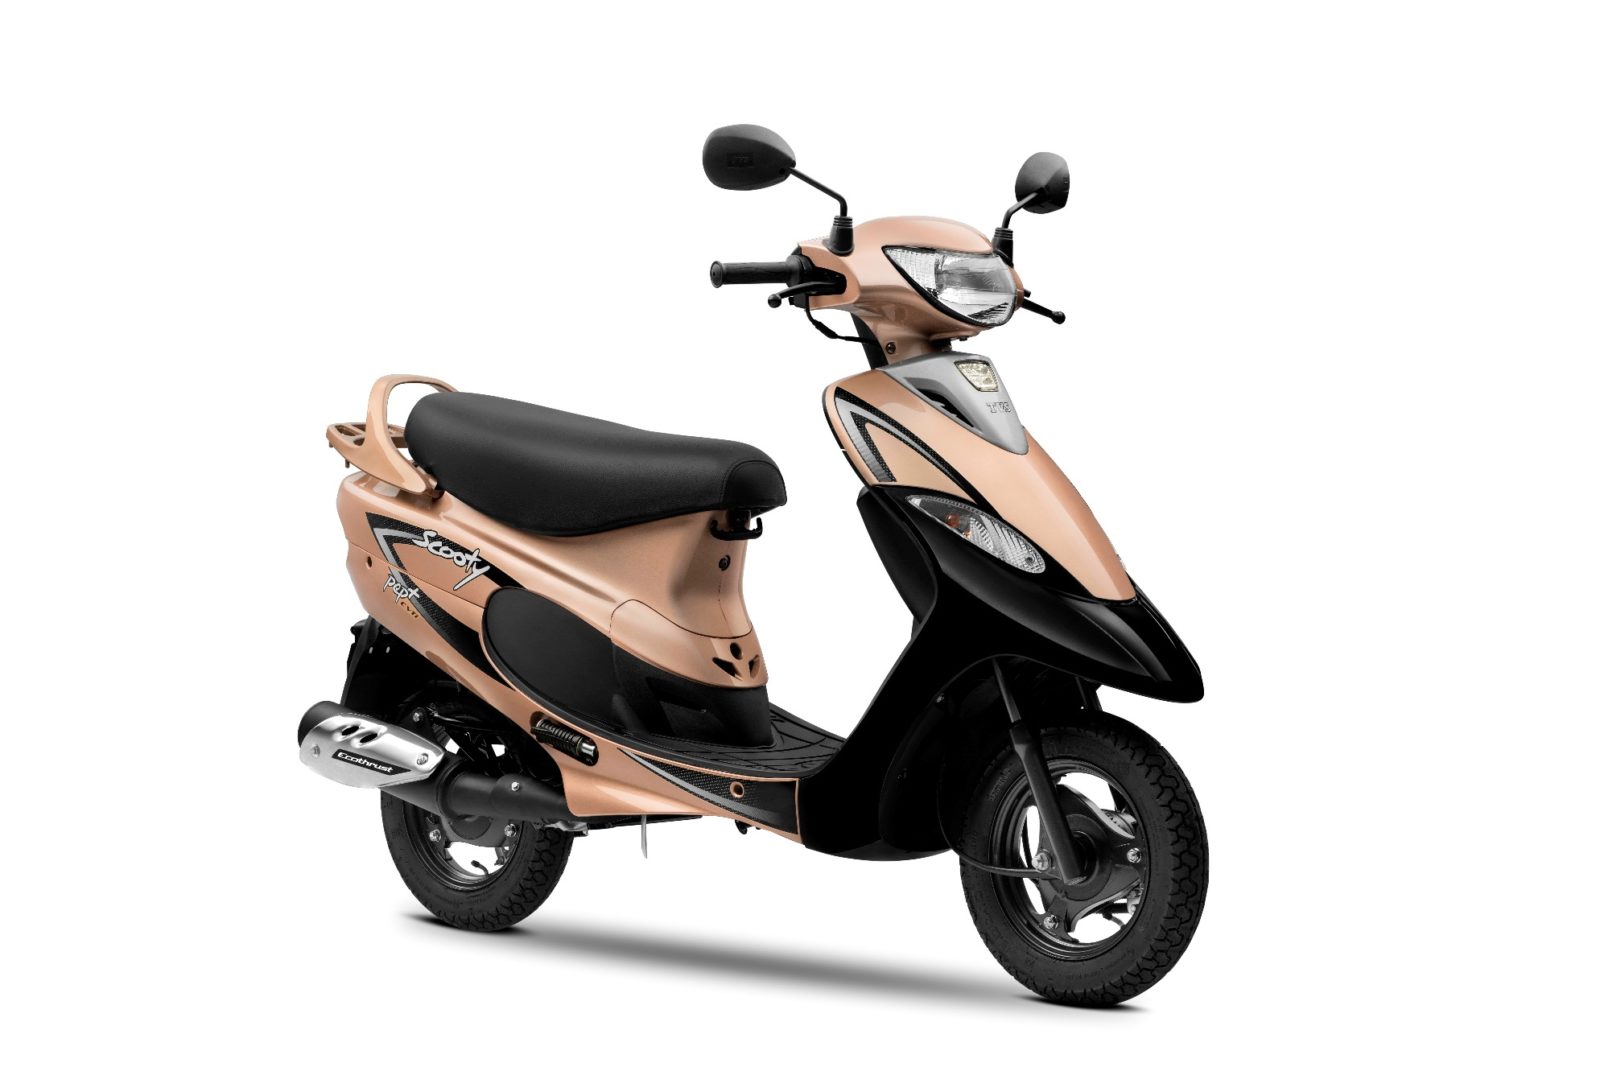 Celebrating 25 Years of TVS Scooty –TVS Motor Company introduces 2 new colors decoding=